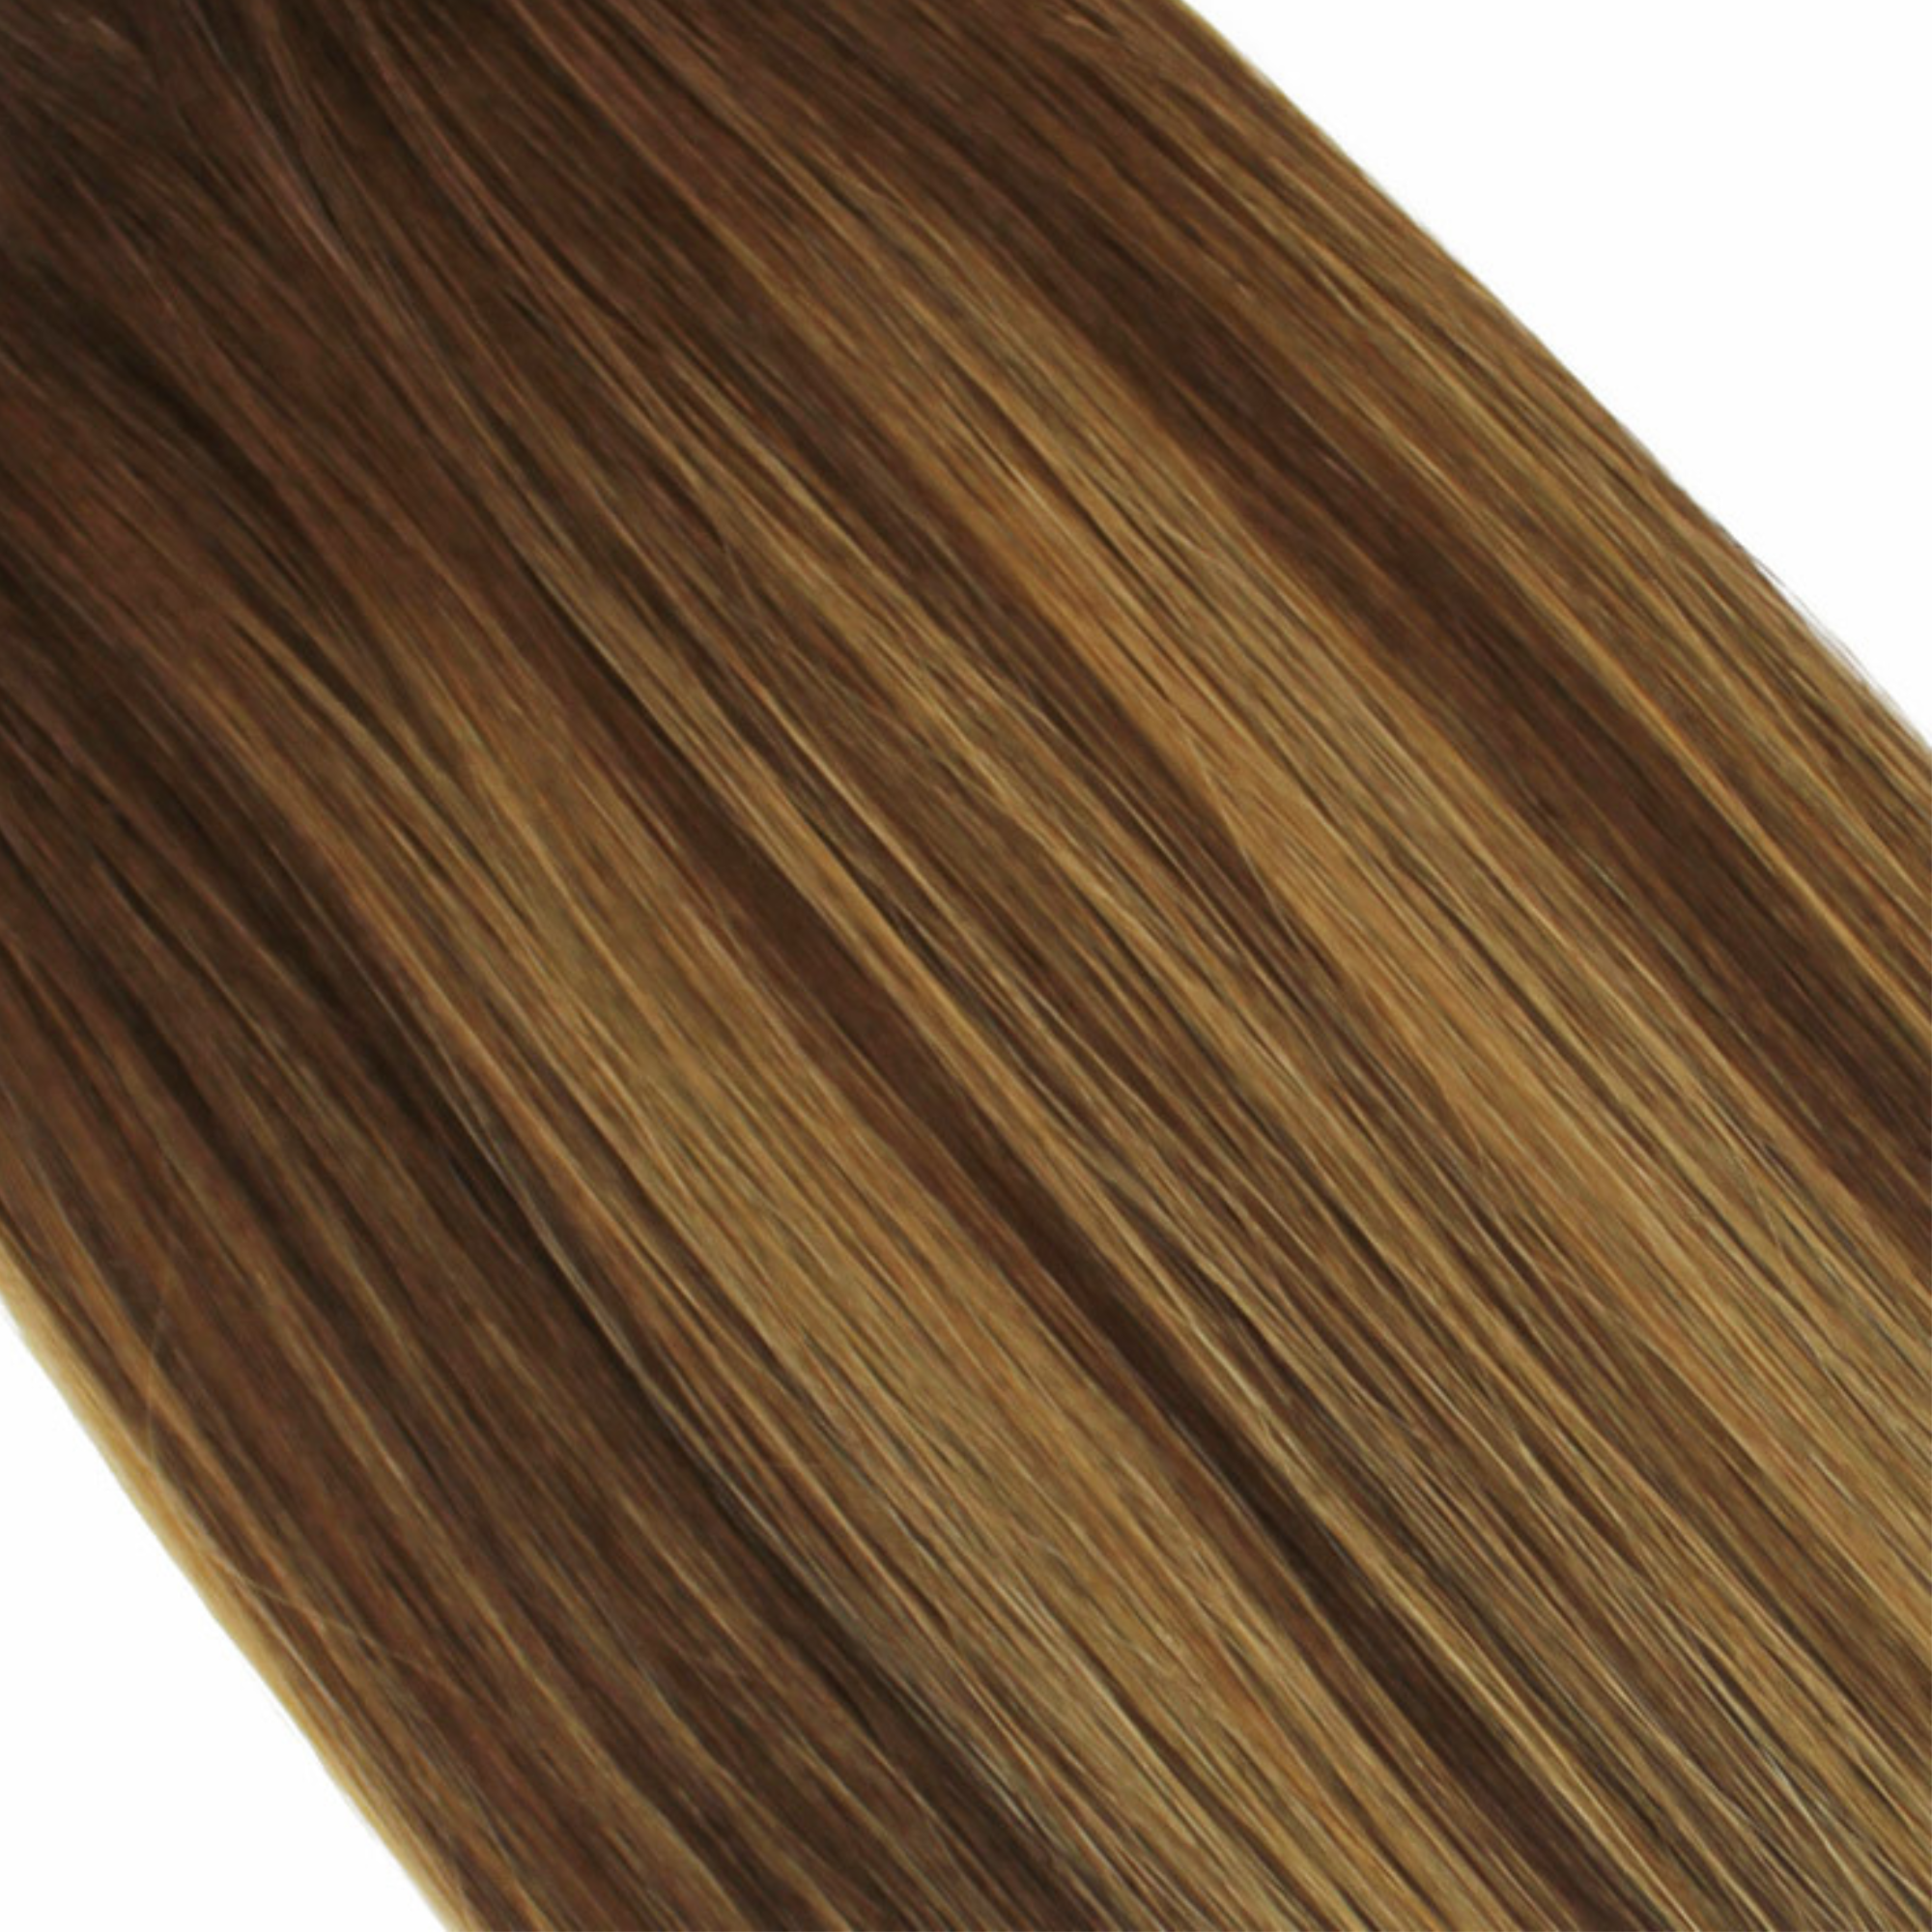 "hair rehab london 22" tape hair extensions shade swatch titled rooted bronze"